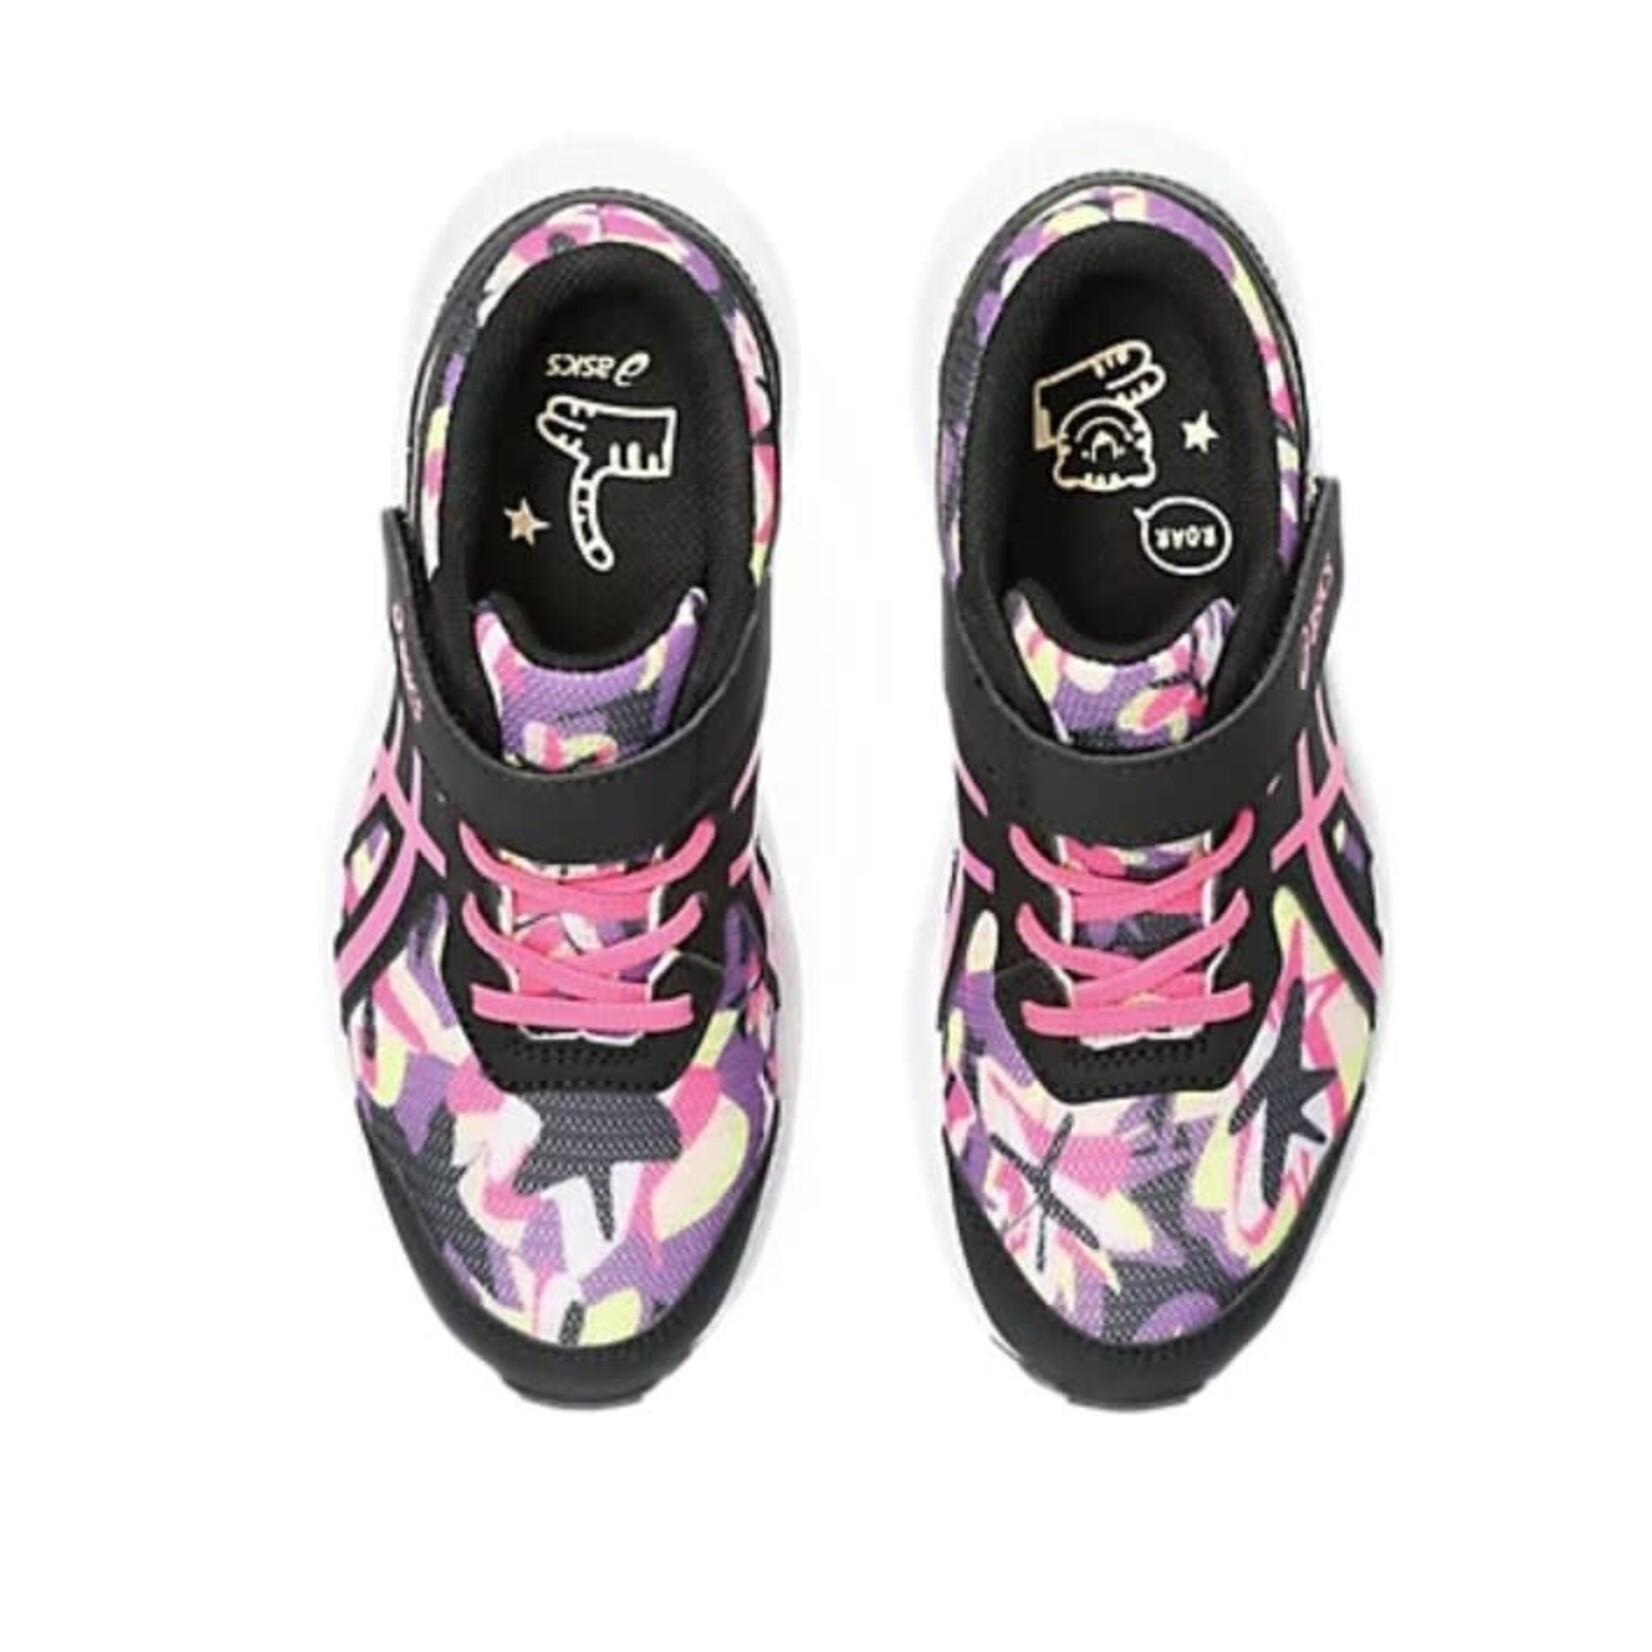 Asics ASICS - Running shoes 'Contend 8PS - Black Hot Pink'